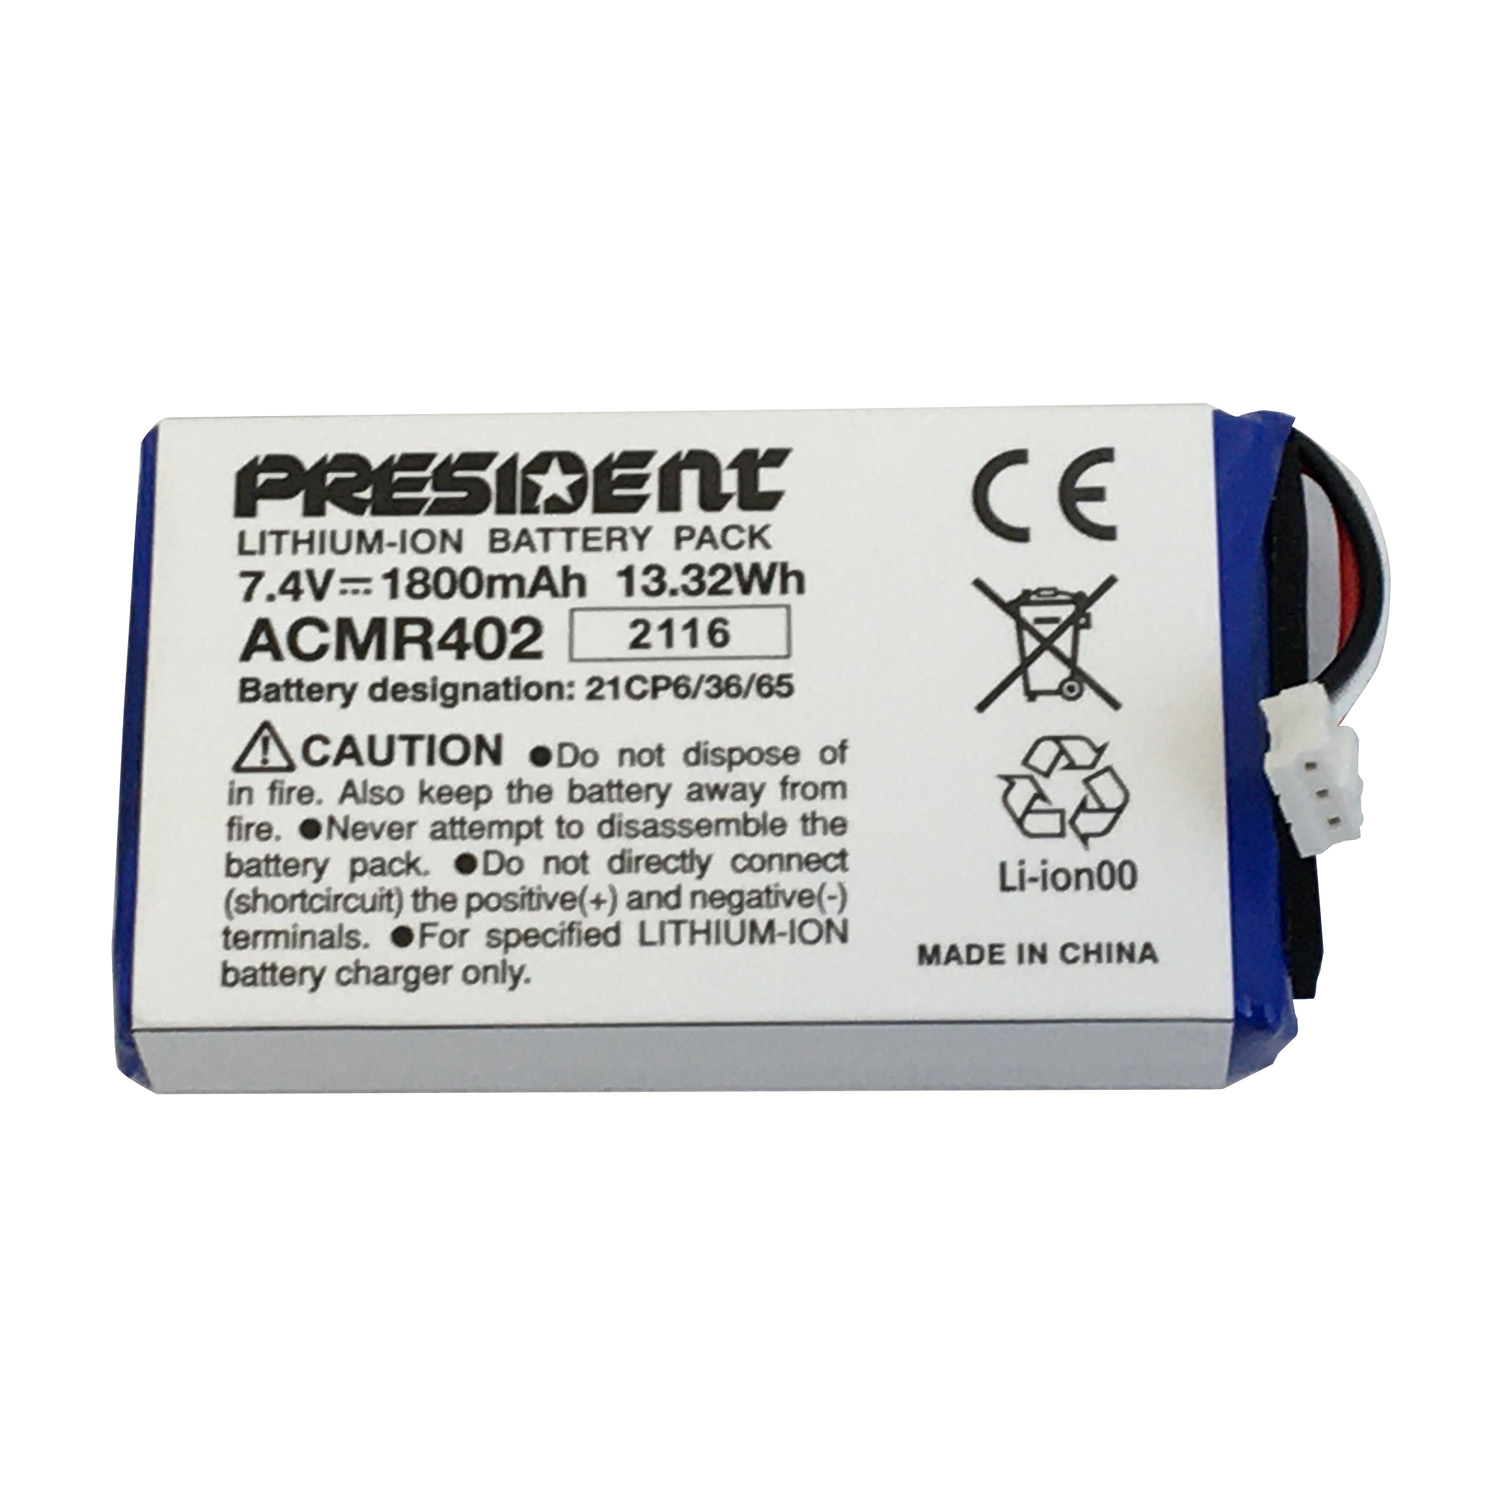 PRESIDENT - ACMR402 RANDY FCC  LITHIUM-ION REPLACEMENT BATTERY PACK